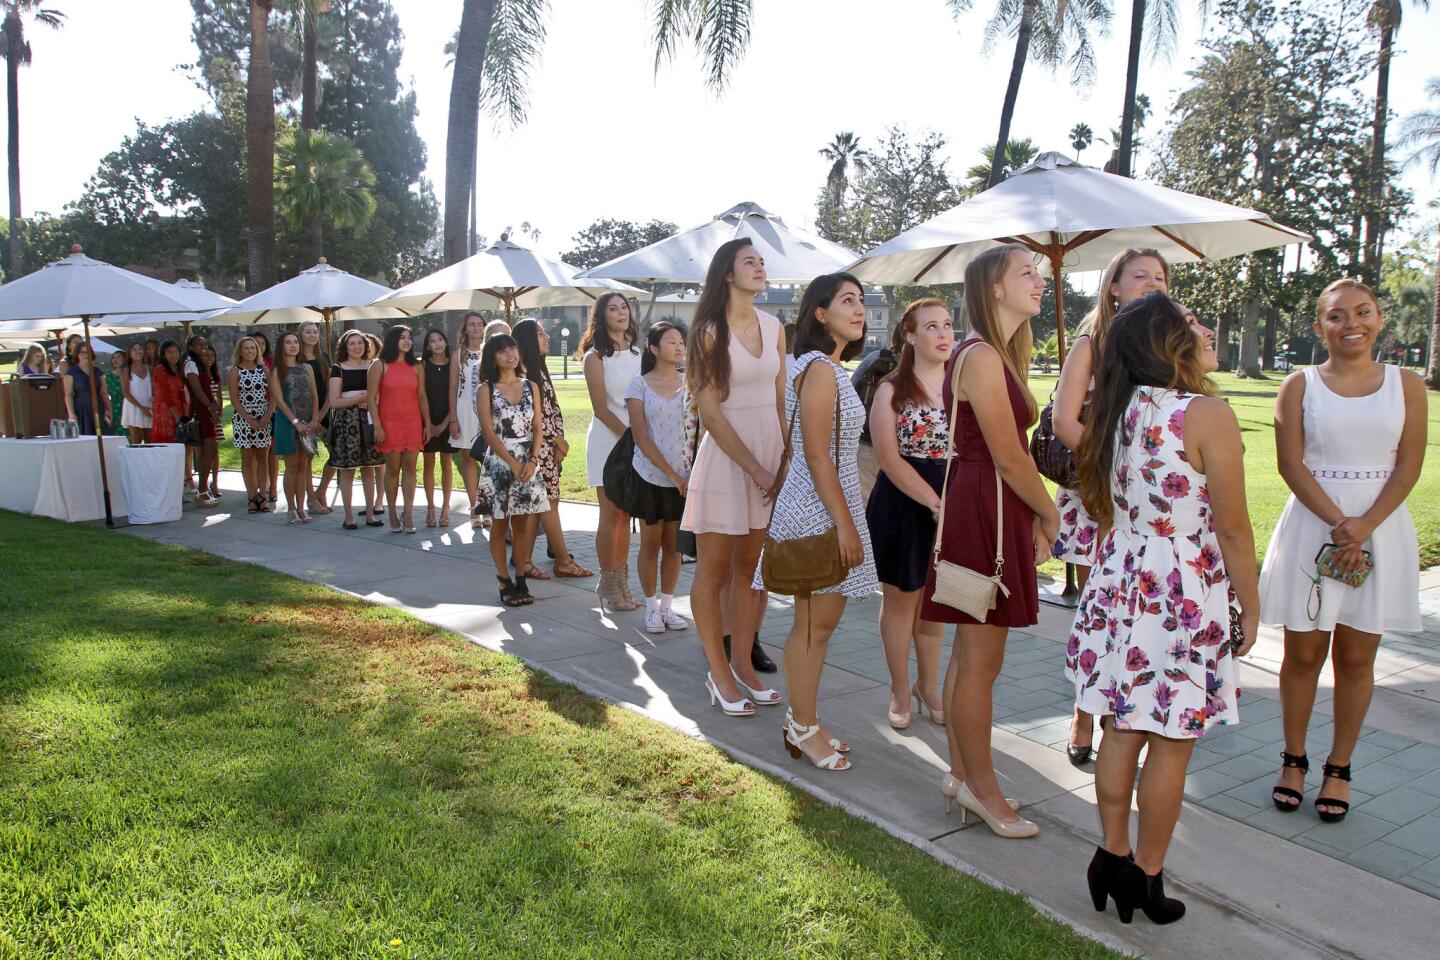 Pasadena-area young women line up to participate in the annual Tournament of Roses 2017 Royal Court Tryouts, at the Tournament House in Pasadena on Saturday, September 10, 2016. About 150 young ladies and 4 young men had showed up for the try-outs in the first two hours. Officials expect about 1,000 to go through the try-outs over the course of two days.